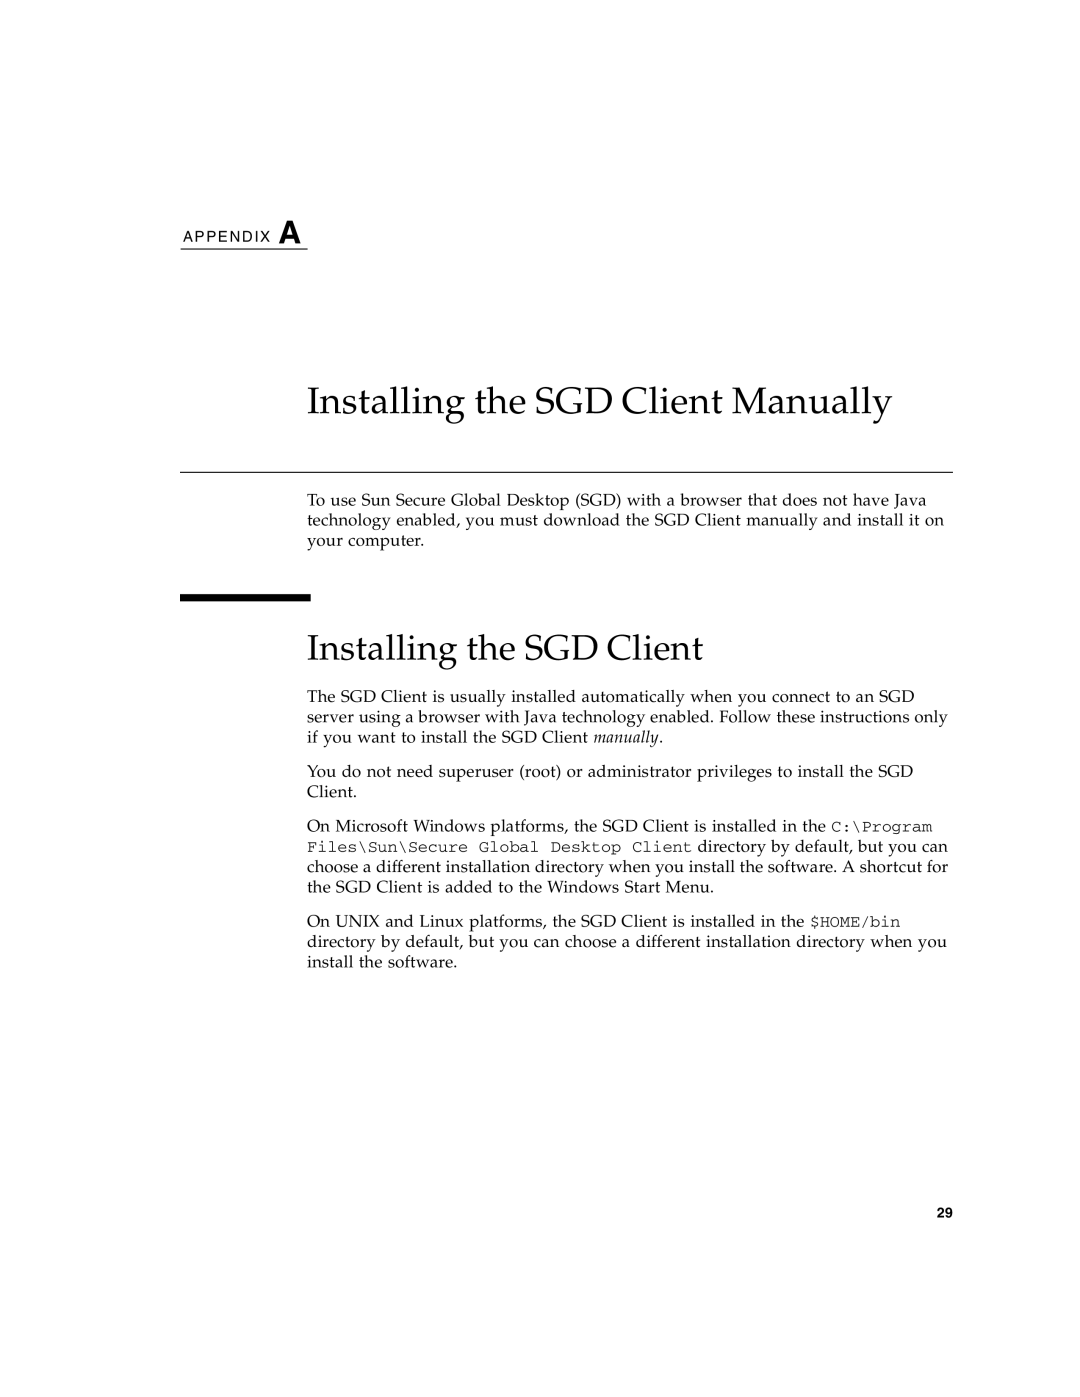 Sun Microsystems 4.5 manual Installing the SGD Client Manually 